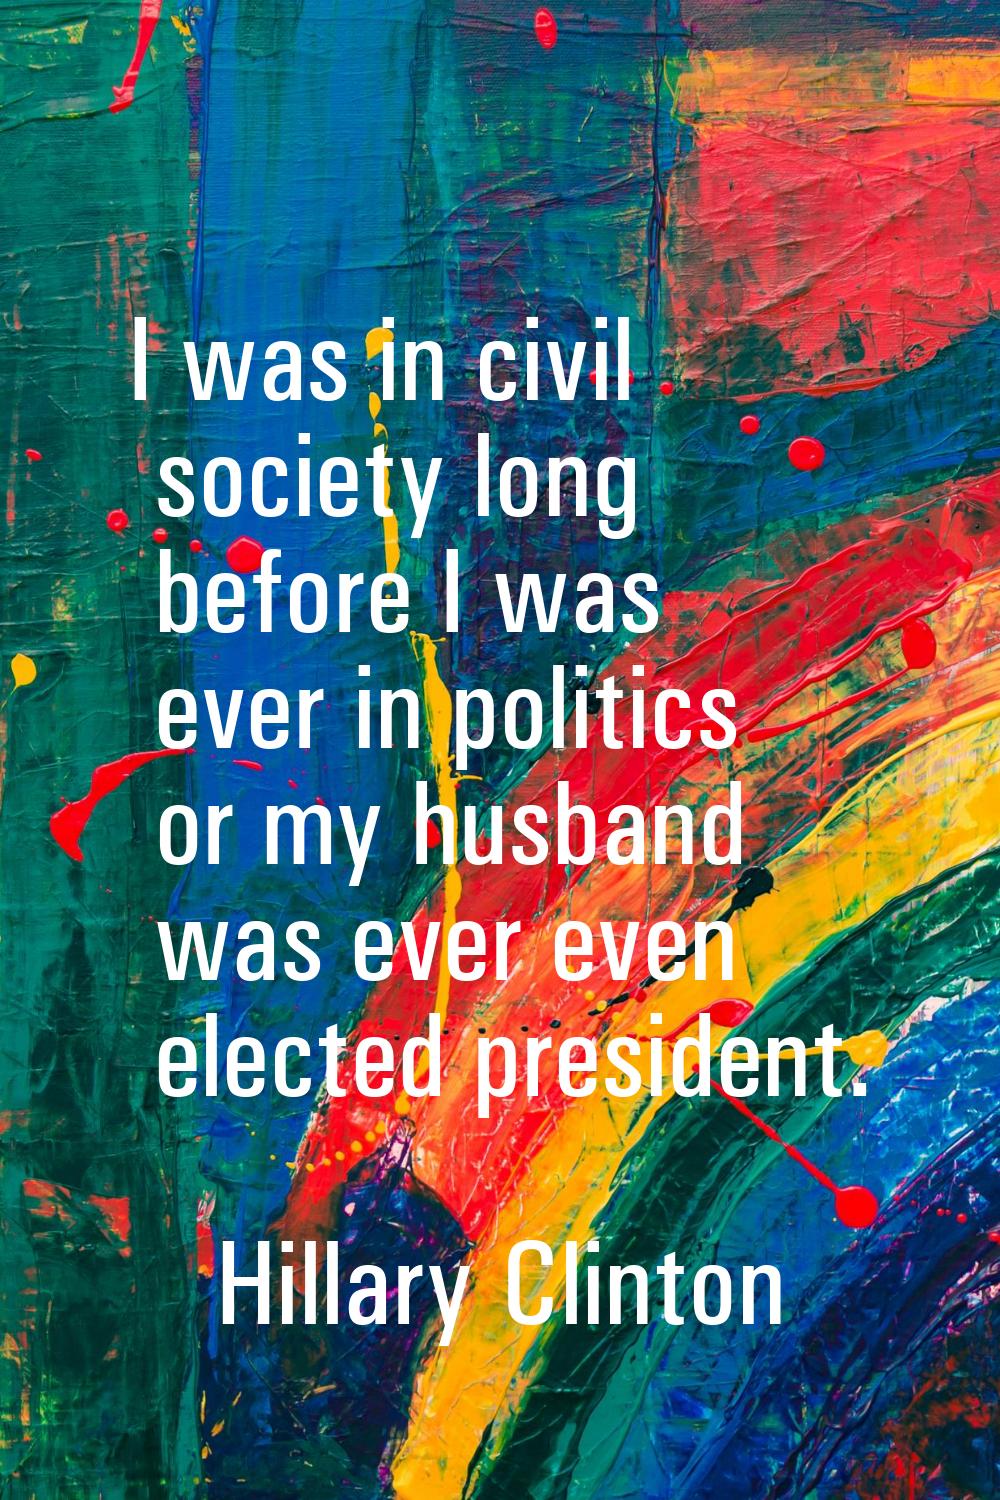 I was in civil society long before I was ever in politics or my husband was ever even elected presi